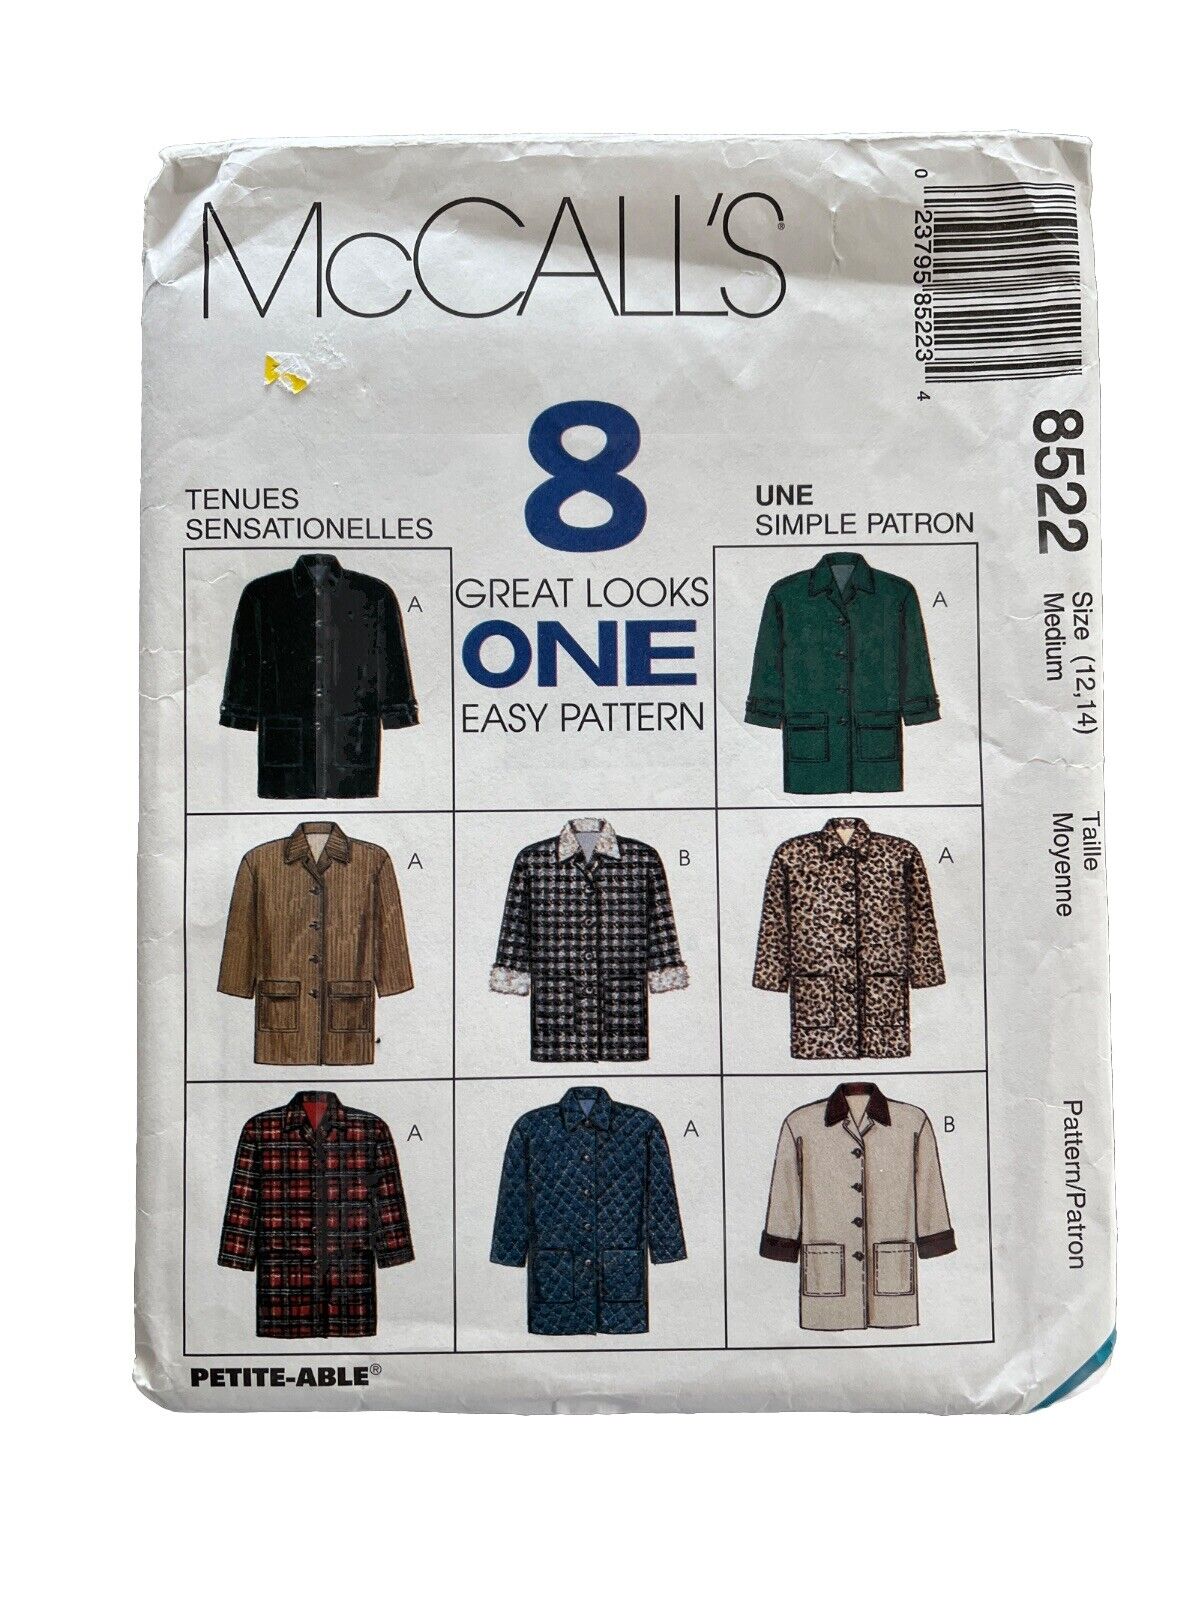 McCalls 8522 Eight in One Lined Jacket Size Medium 12 - 14 UNCUT Bust 36